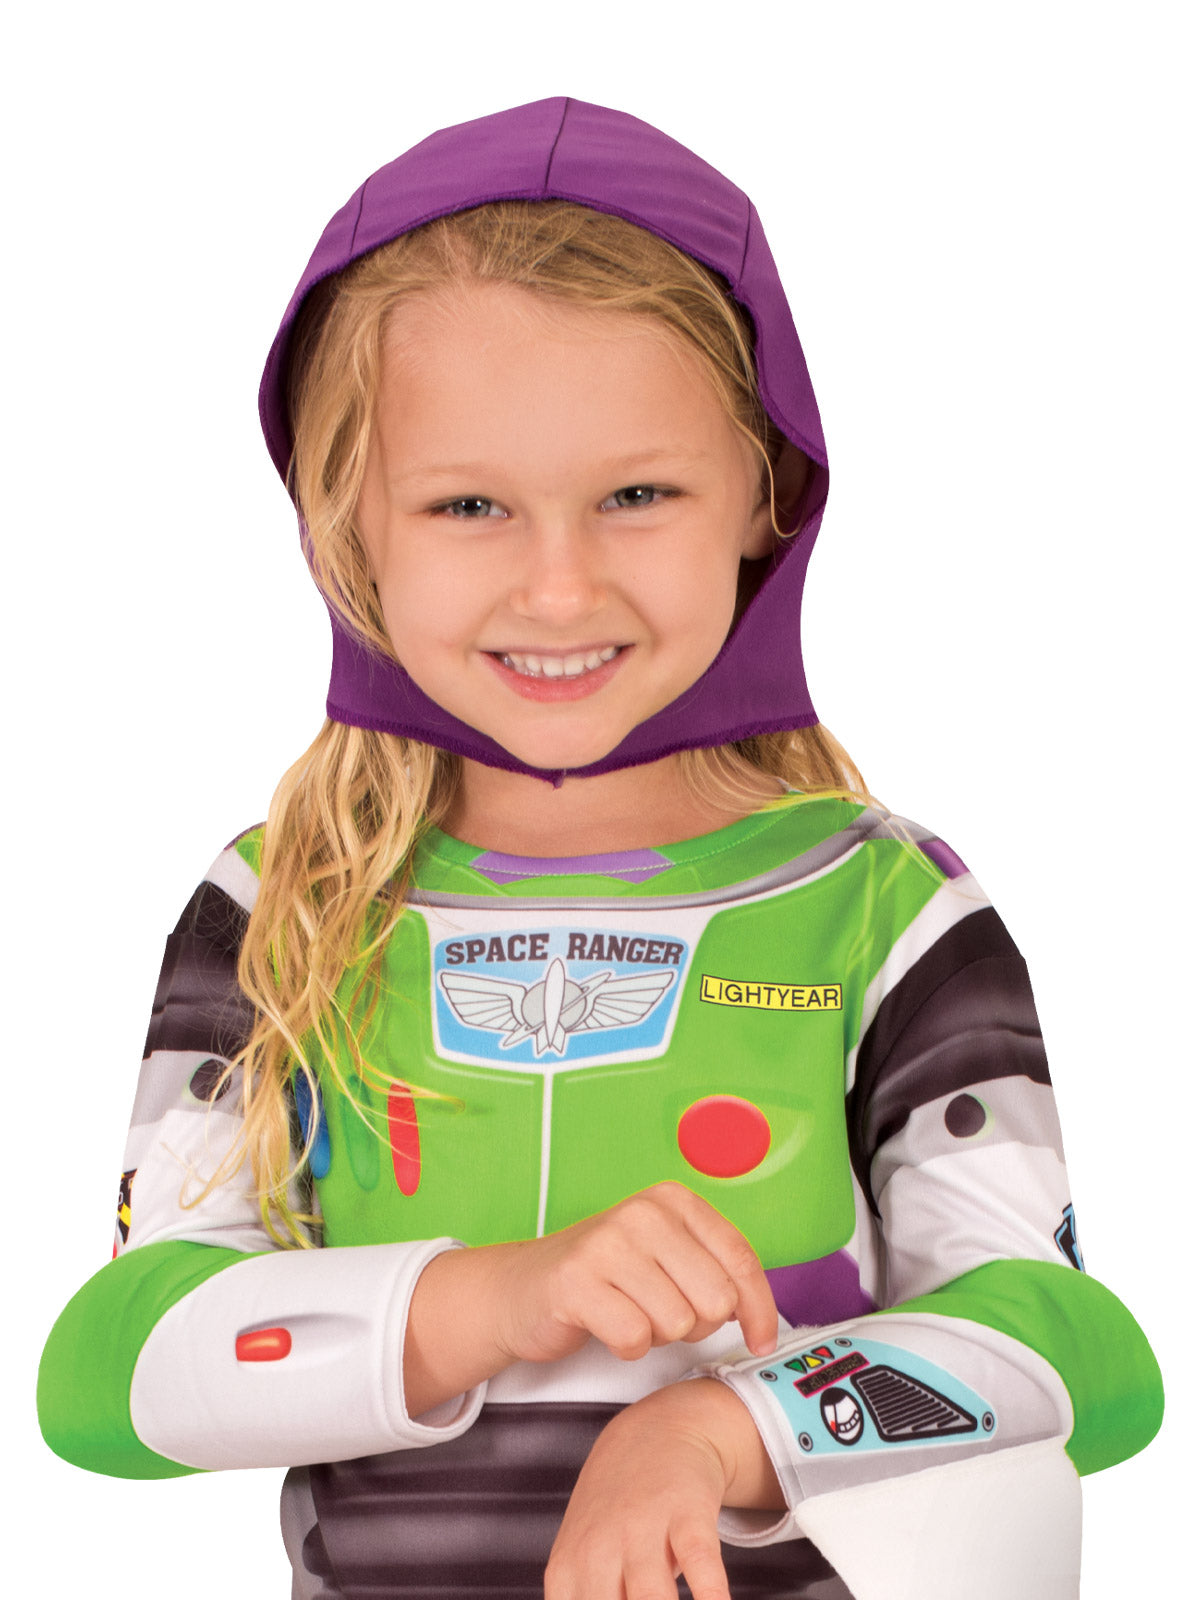 Buzz Girl Toy Story 4 Girl Deluxe Child Costume Disney Prixcar Licensed